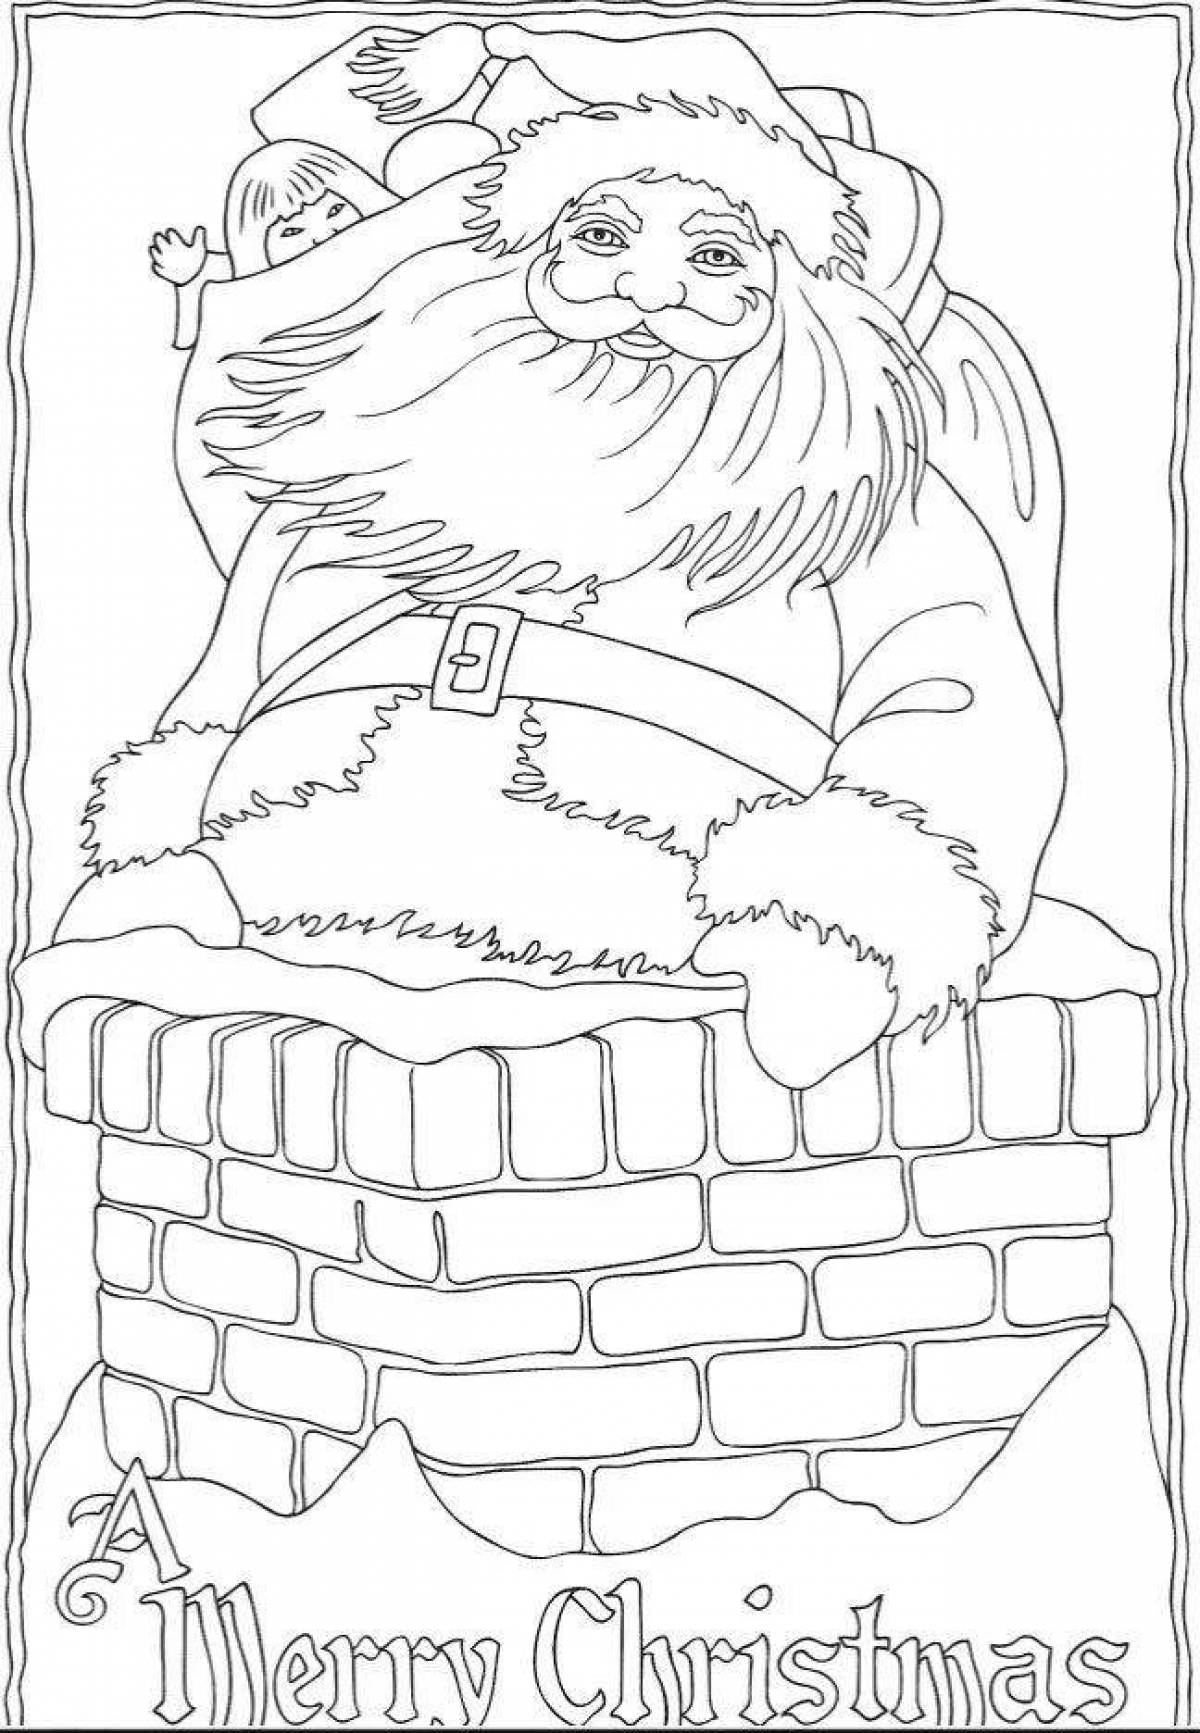 Coloring page gorgeous santa claus with bag